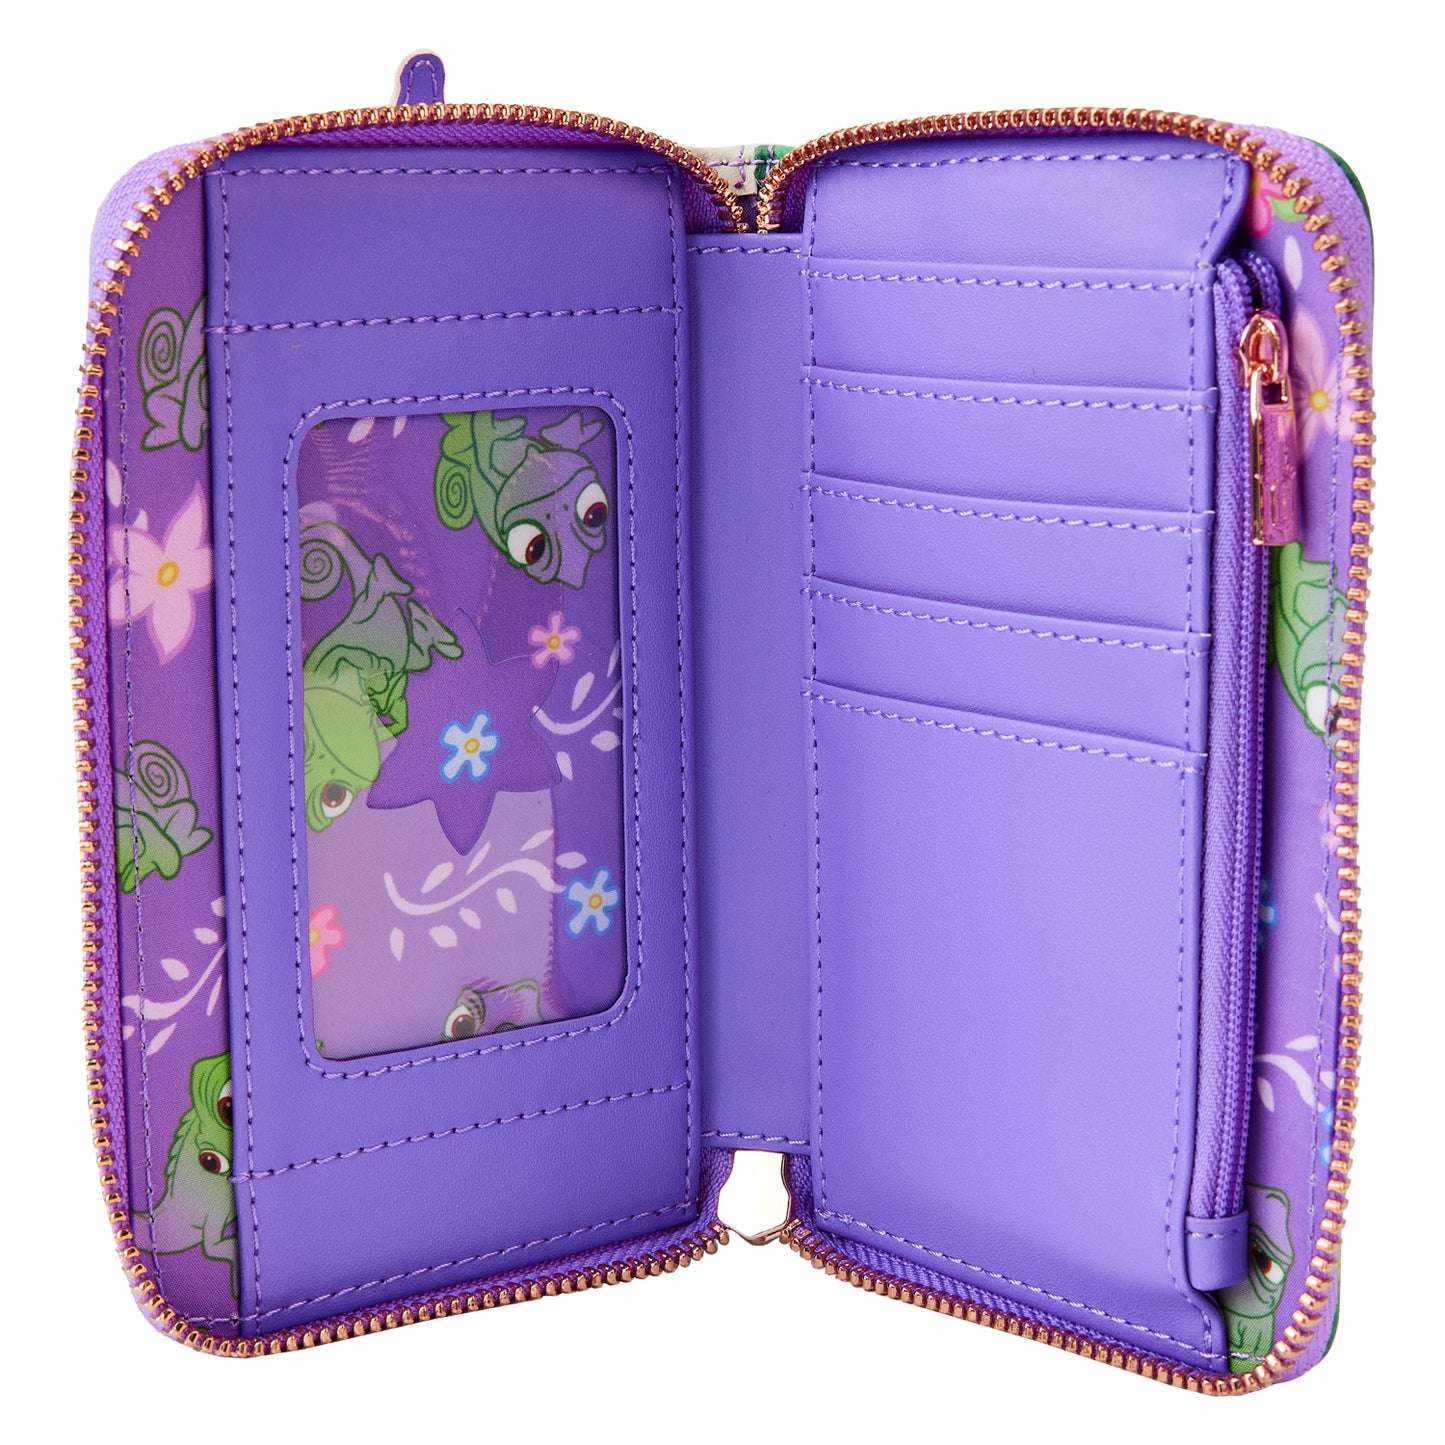 Loungefly Disney Tangled Rapunzel Swinging From Tower Zip-Around Wallet